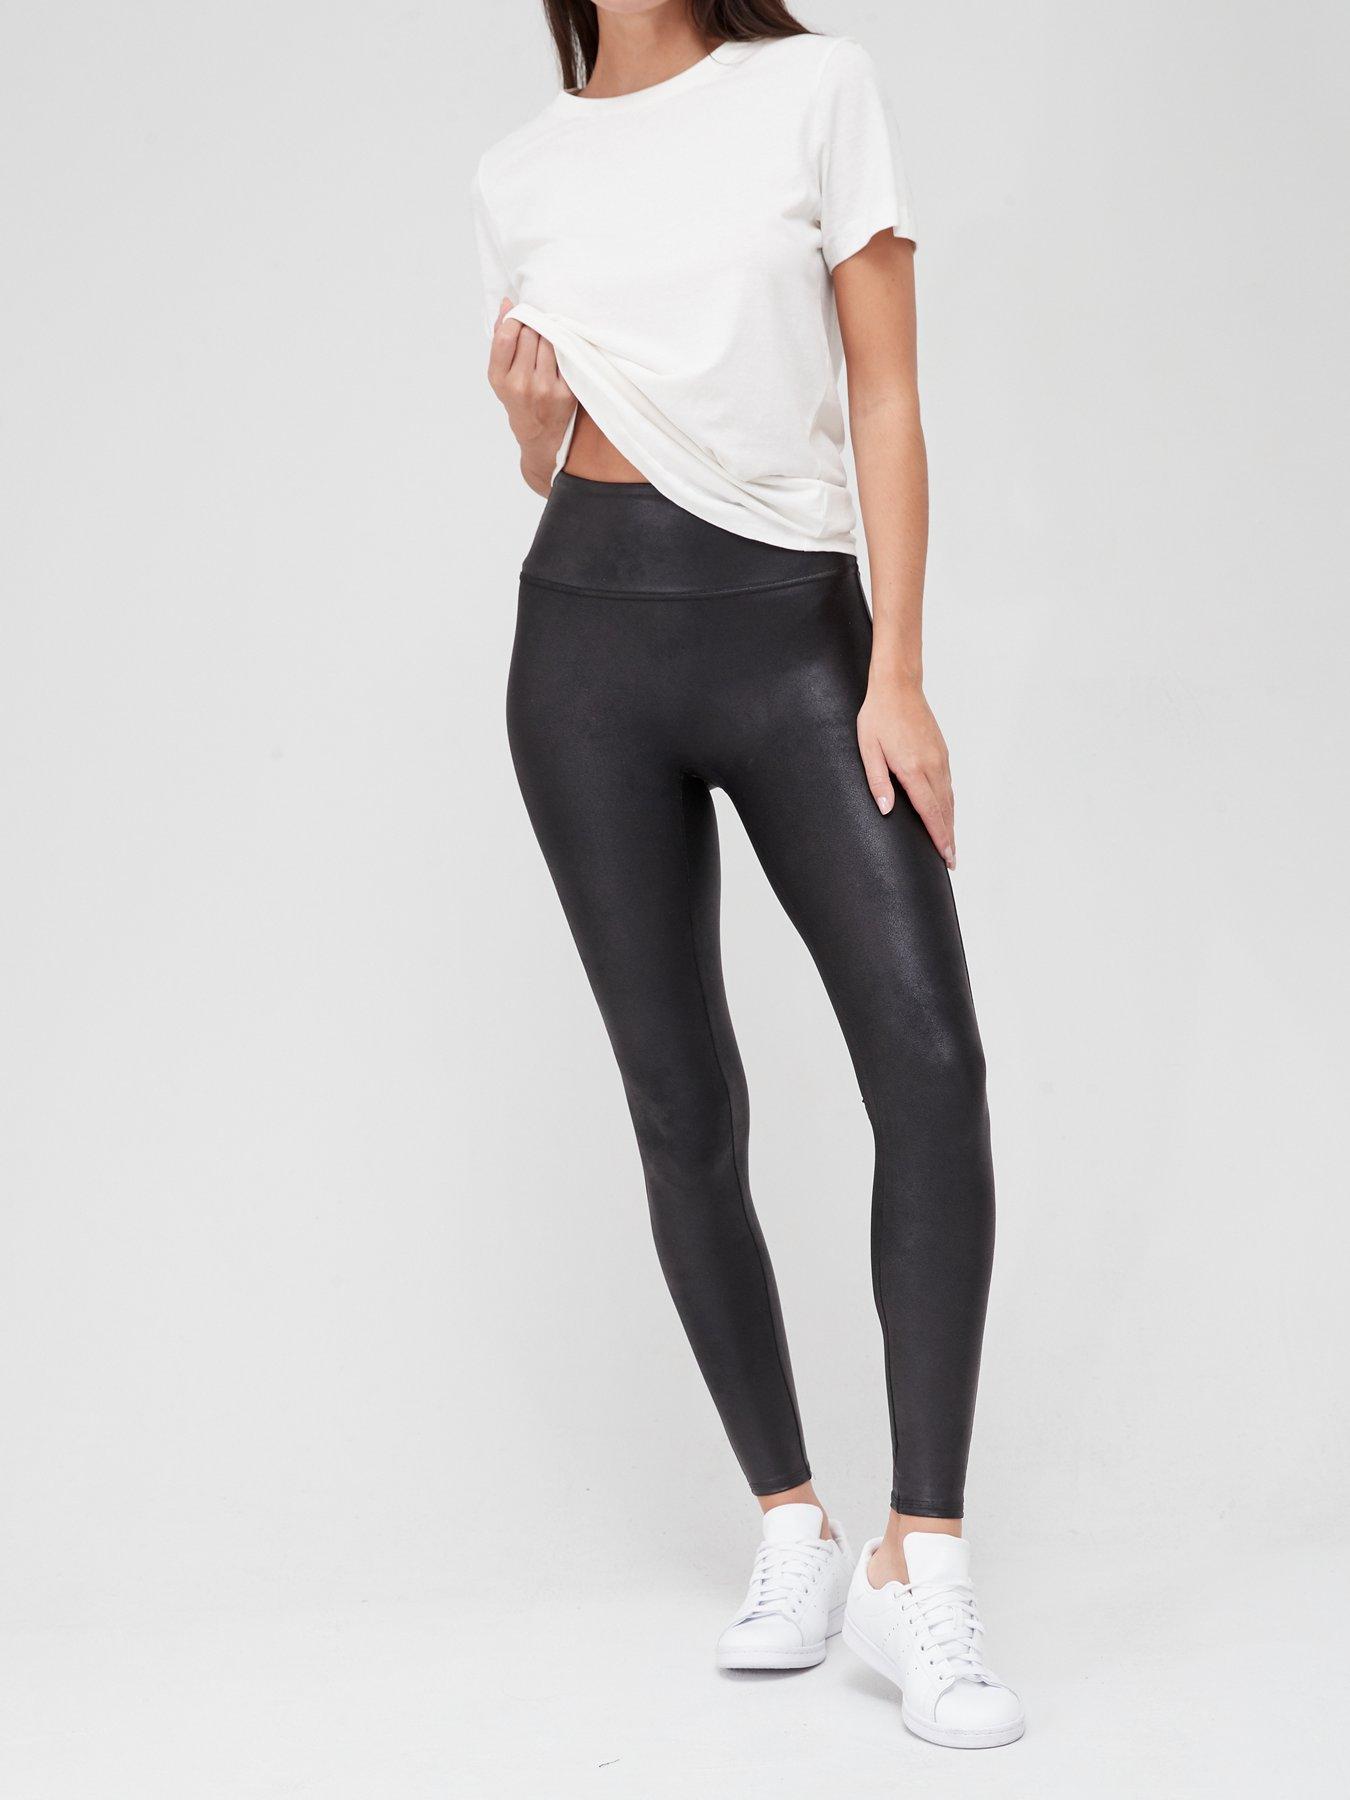 Off White Leather-Look High Waist Leggings